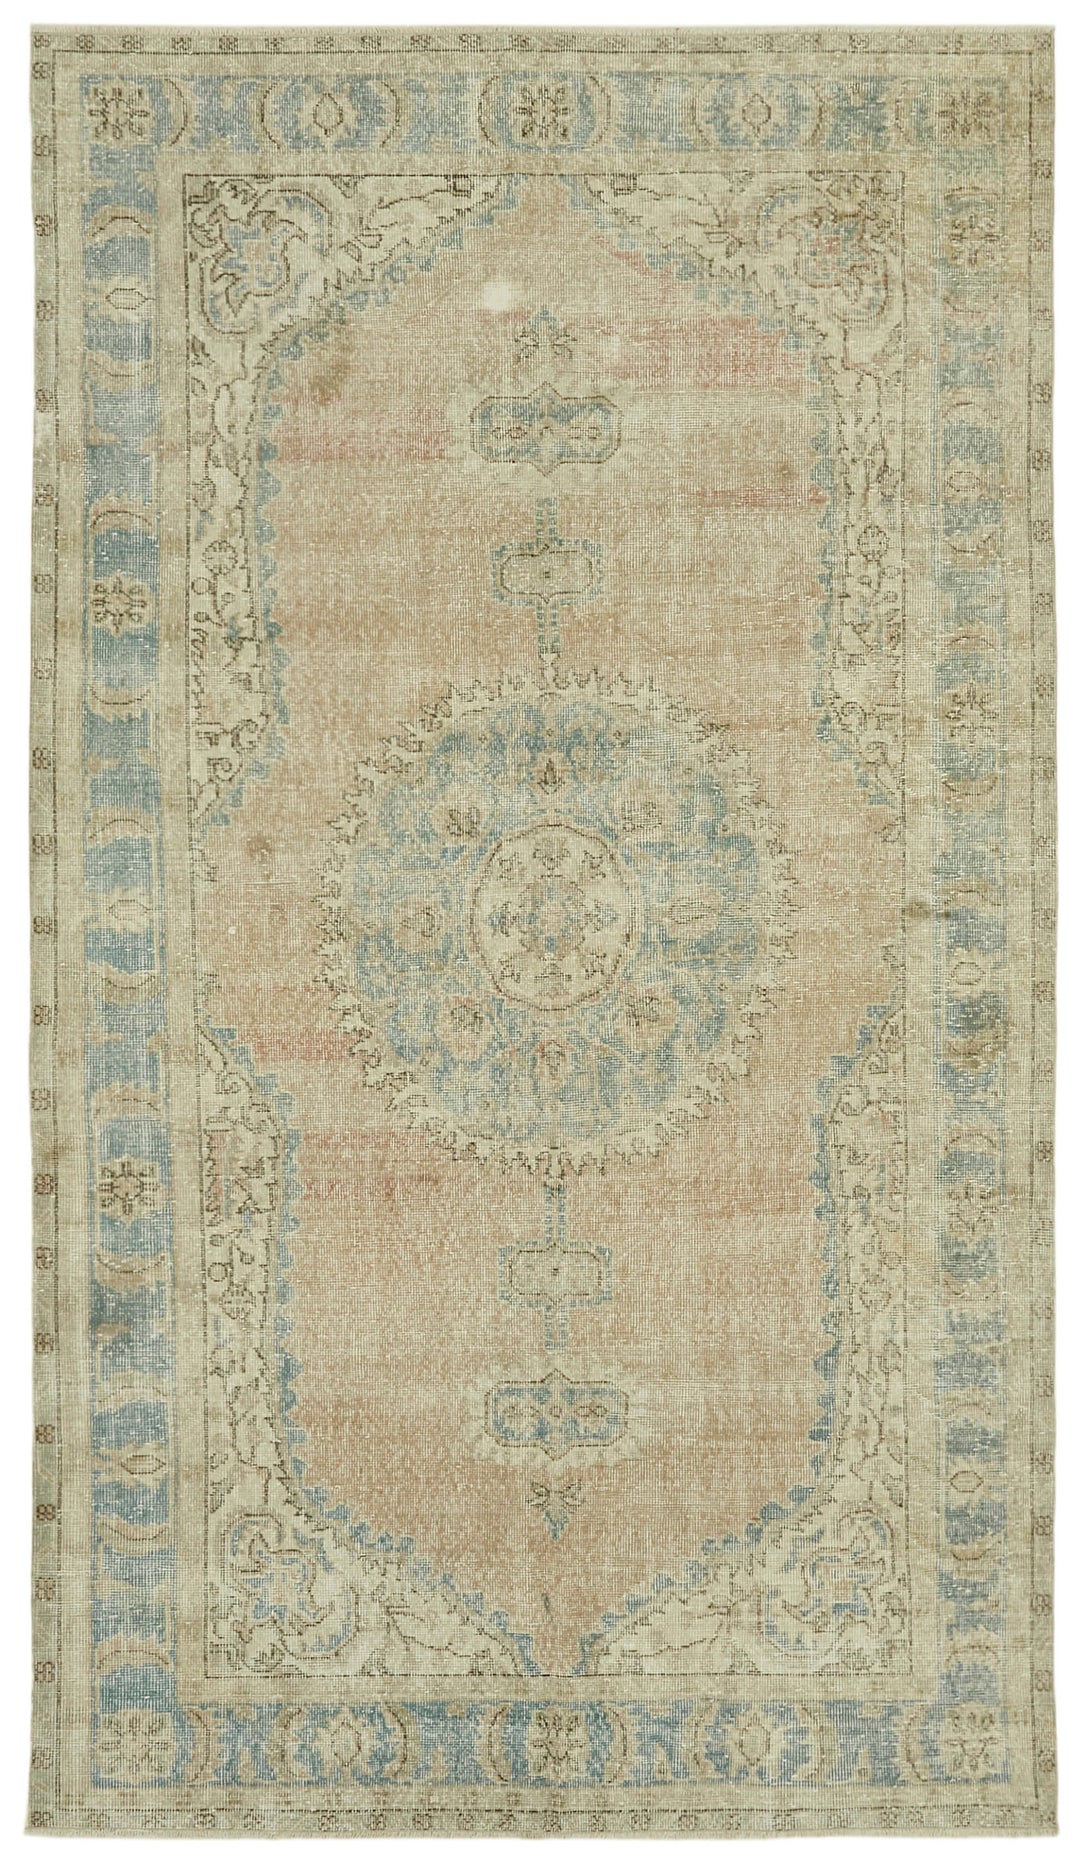 Handmade White Wash Area Rug > Design# OL-AC-41735 > Size: 5'-8" x 9'-11", Carpet Culture Rugs, Handmade Rugs, NYC Rugs, New Rugs, Shop Rugs, Rug Store, Outlet Rugs, SoHo Rugs, Rugs in USA